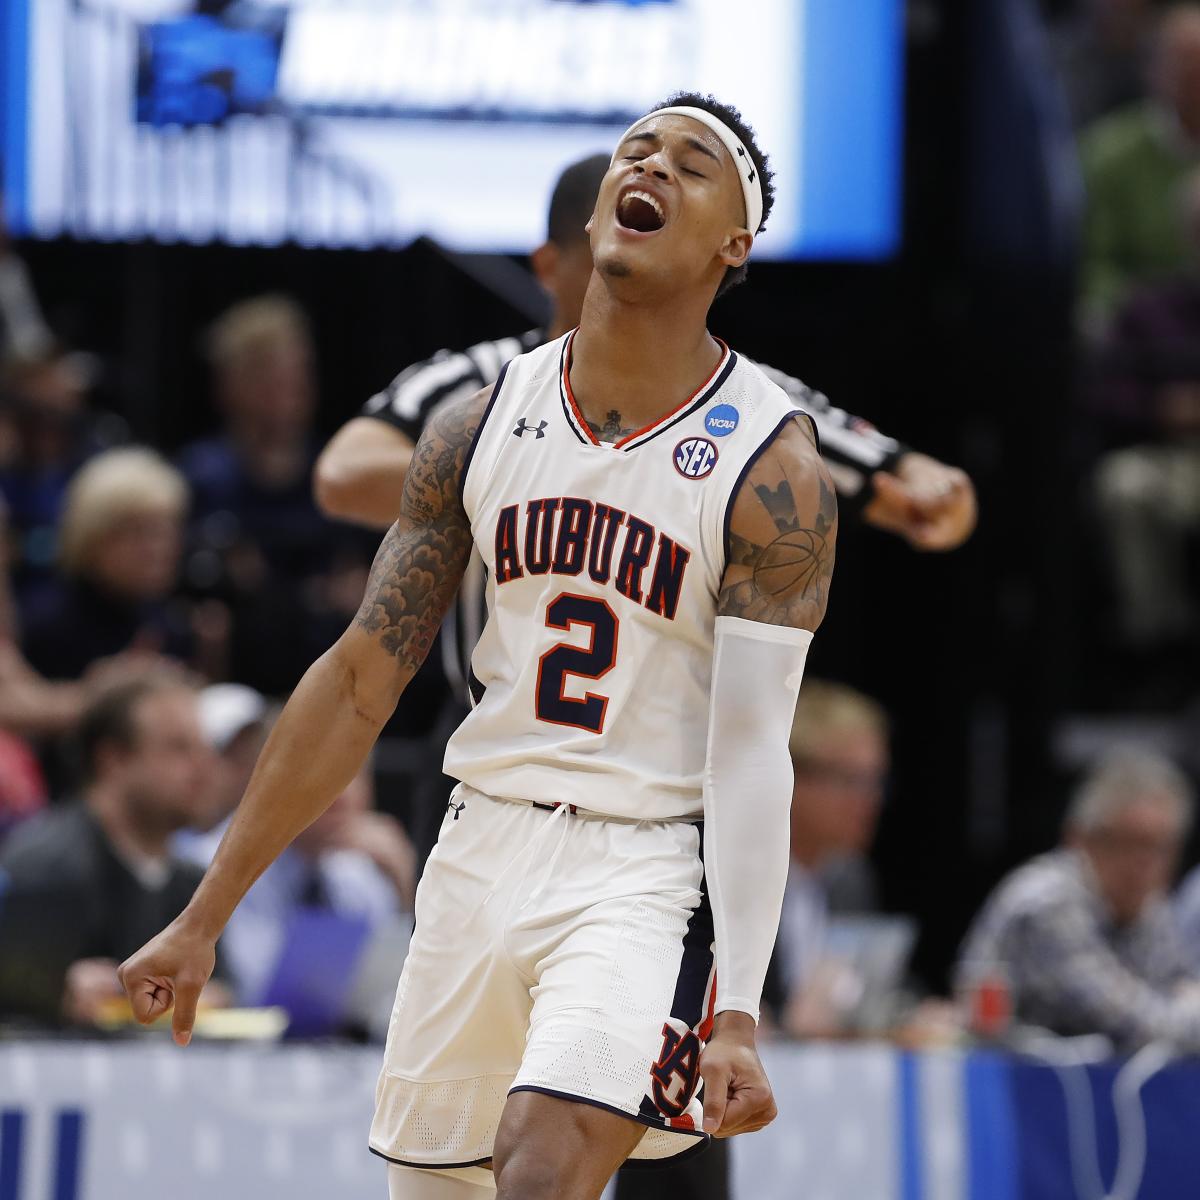 Beware of the Tigers: Auburn Is the Hottest Team in the 2019 NCAA